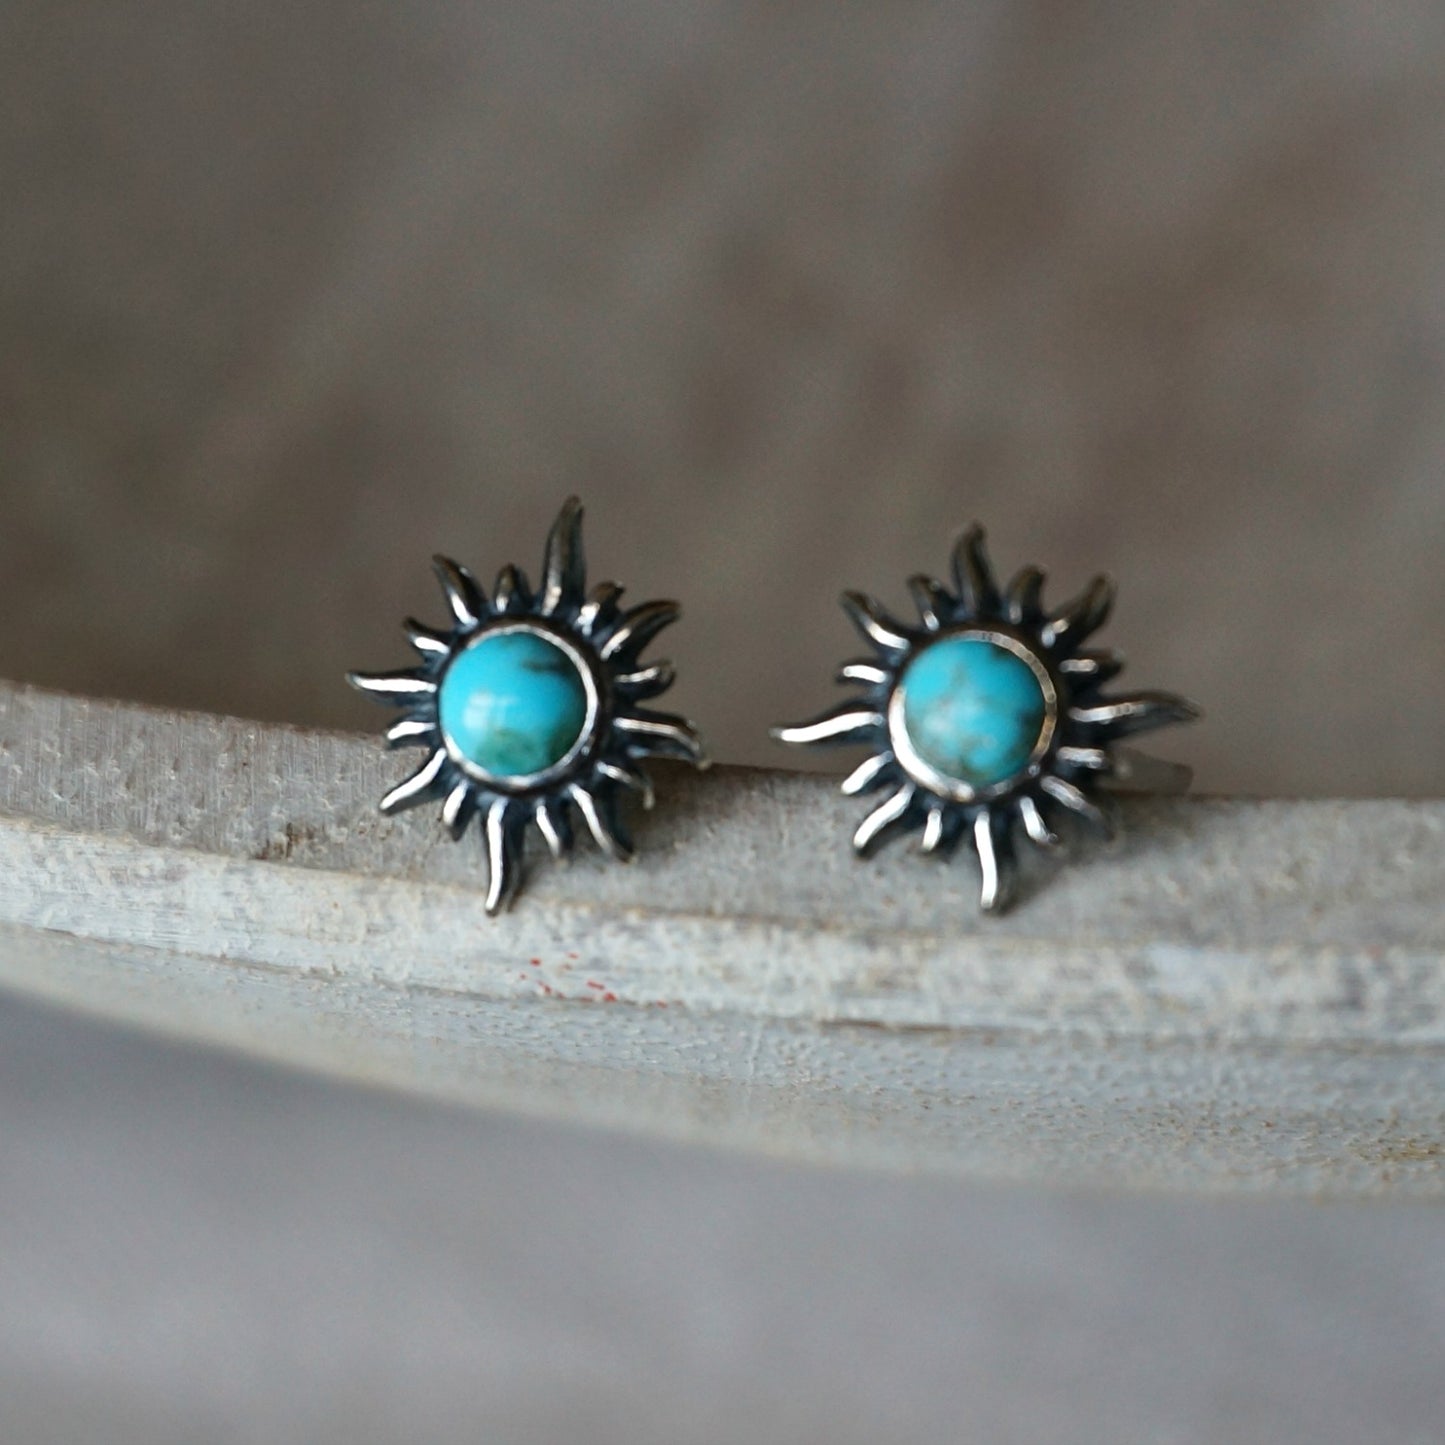 Sunburst Turquoise Earrings - Sterling Silver - Moon Room Shop and Wellness